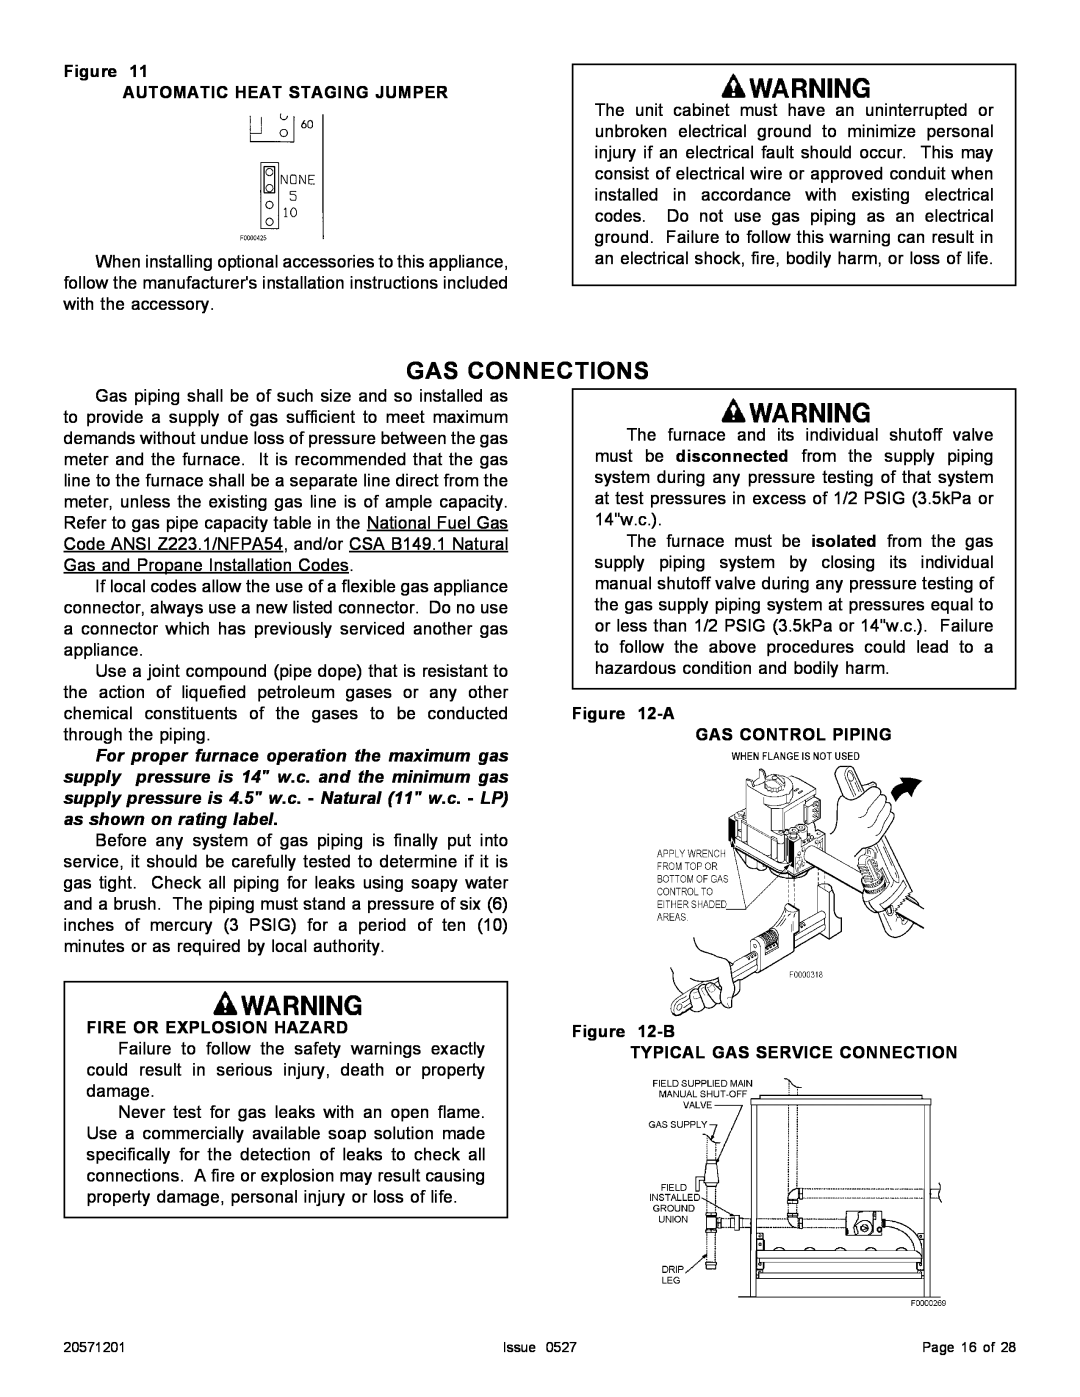 Allied Air Enterprises Upflow Gas Connections, Figure AUTOMATIC HEAT STAGING JUMPER, Fire Or Explosion Hazard 